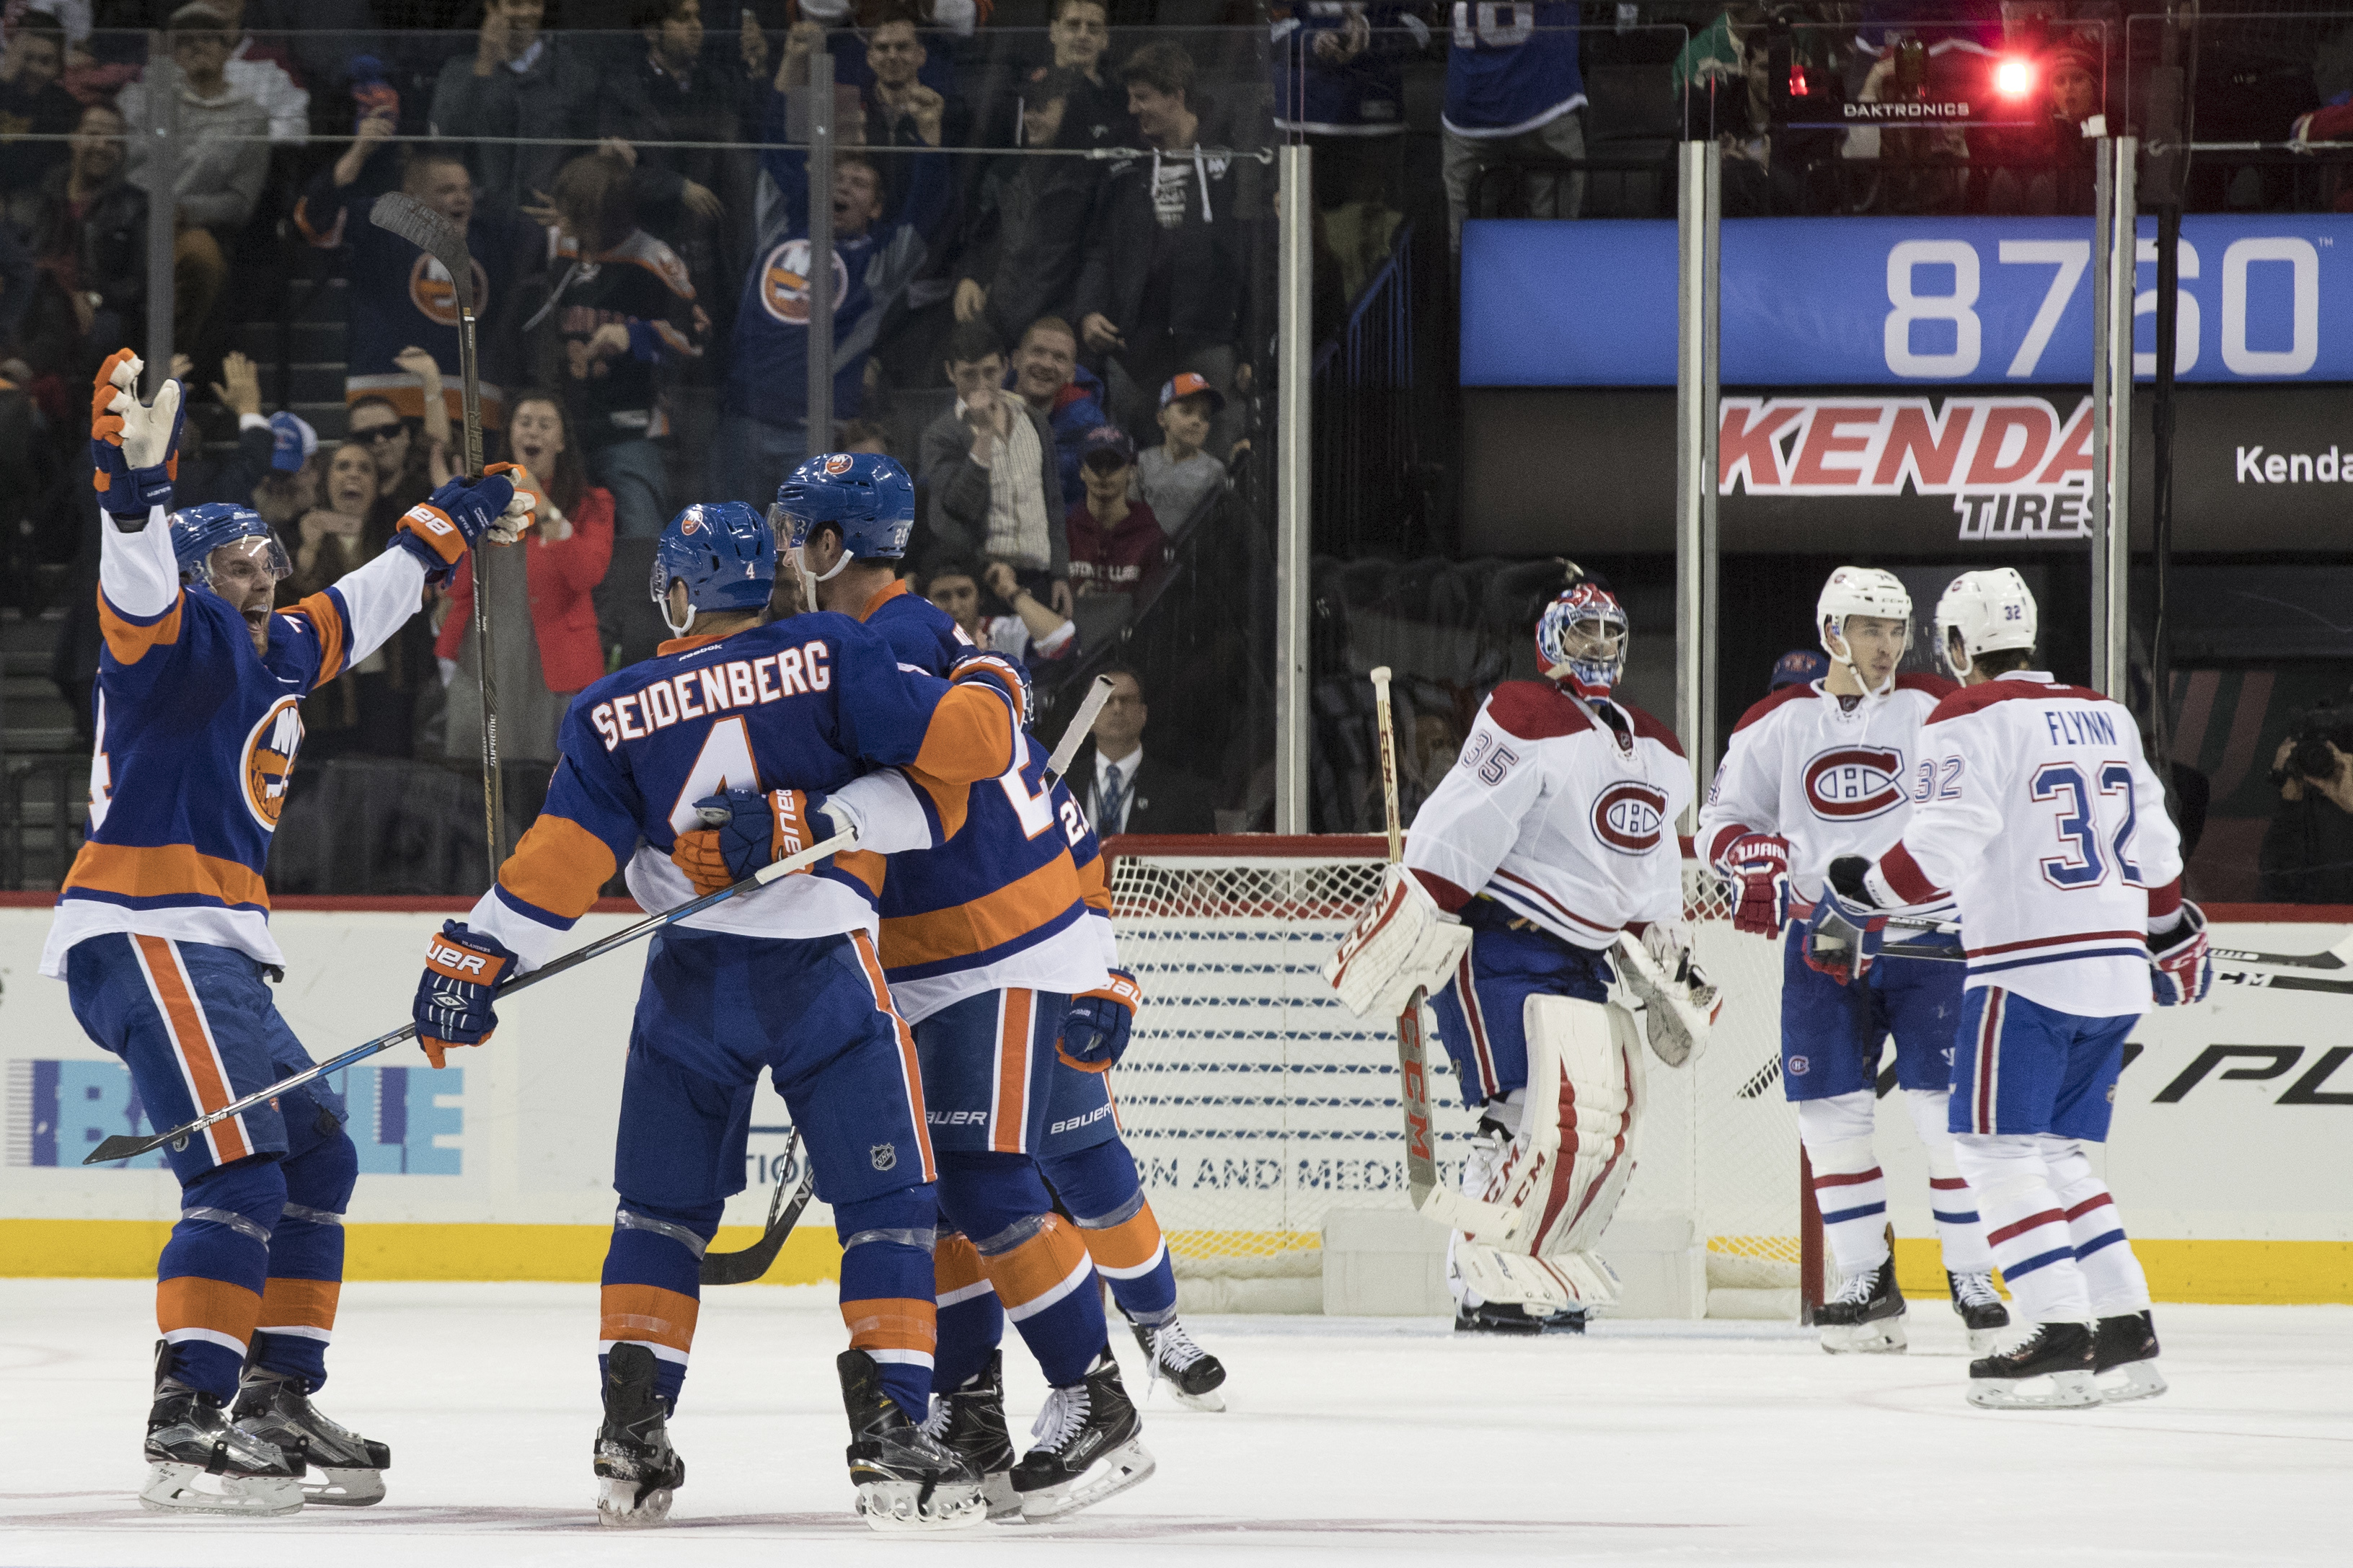 New York Islanders defenseman Dennis Seidenberg (4) celebrates with his teammates after scoring a goal during the third period of an NHL hockey game against the Montreal Canadiens, Wednesday, Oct. 26, 2016 in New York. The Canadiens won 3-2. (AP Photo/Mary Altaffer)